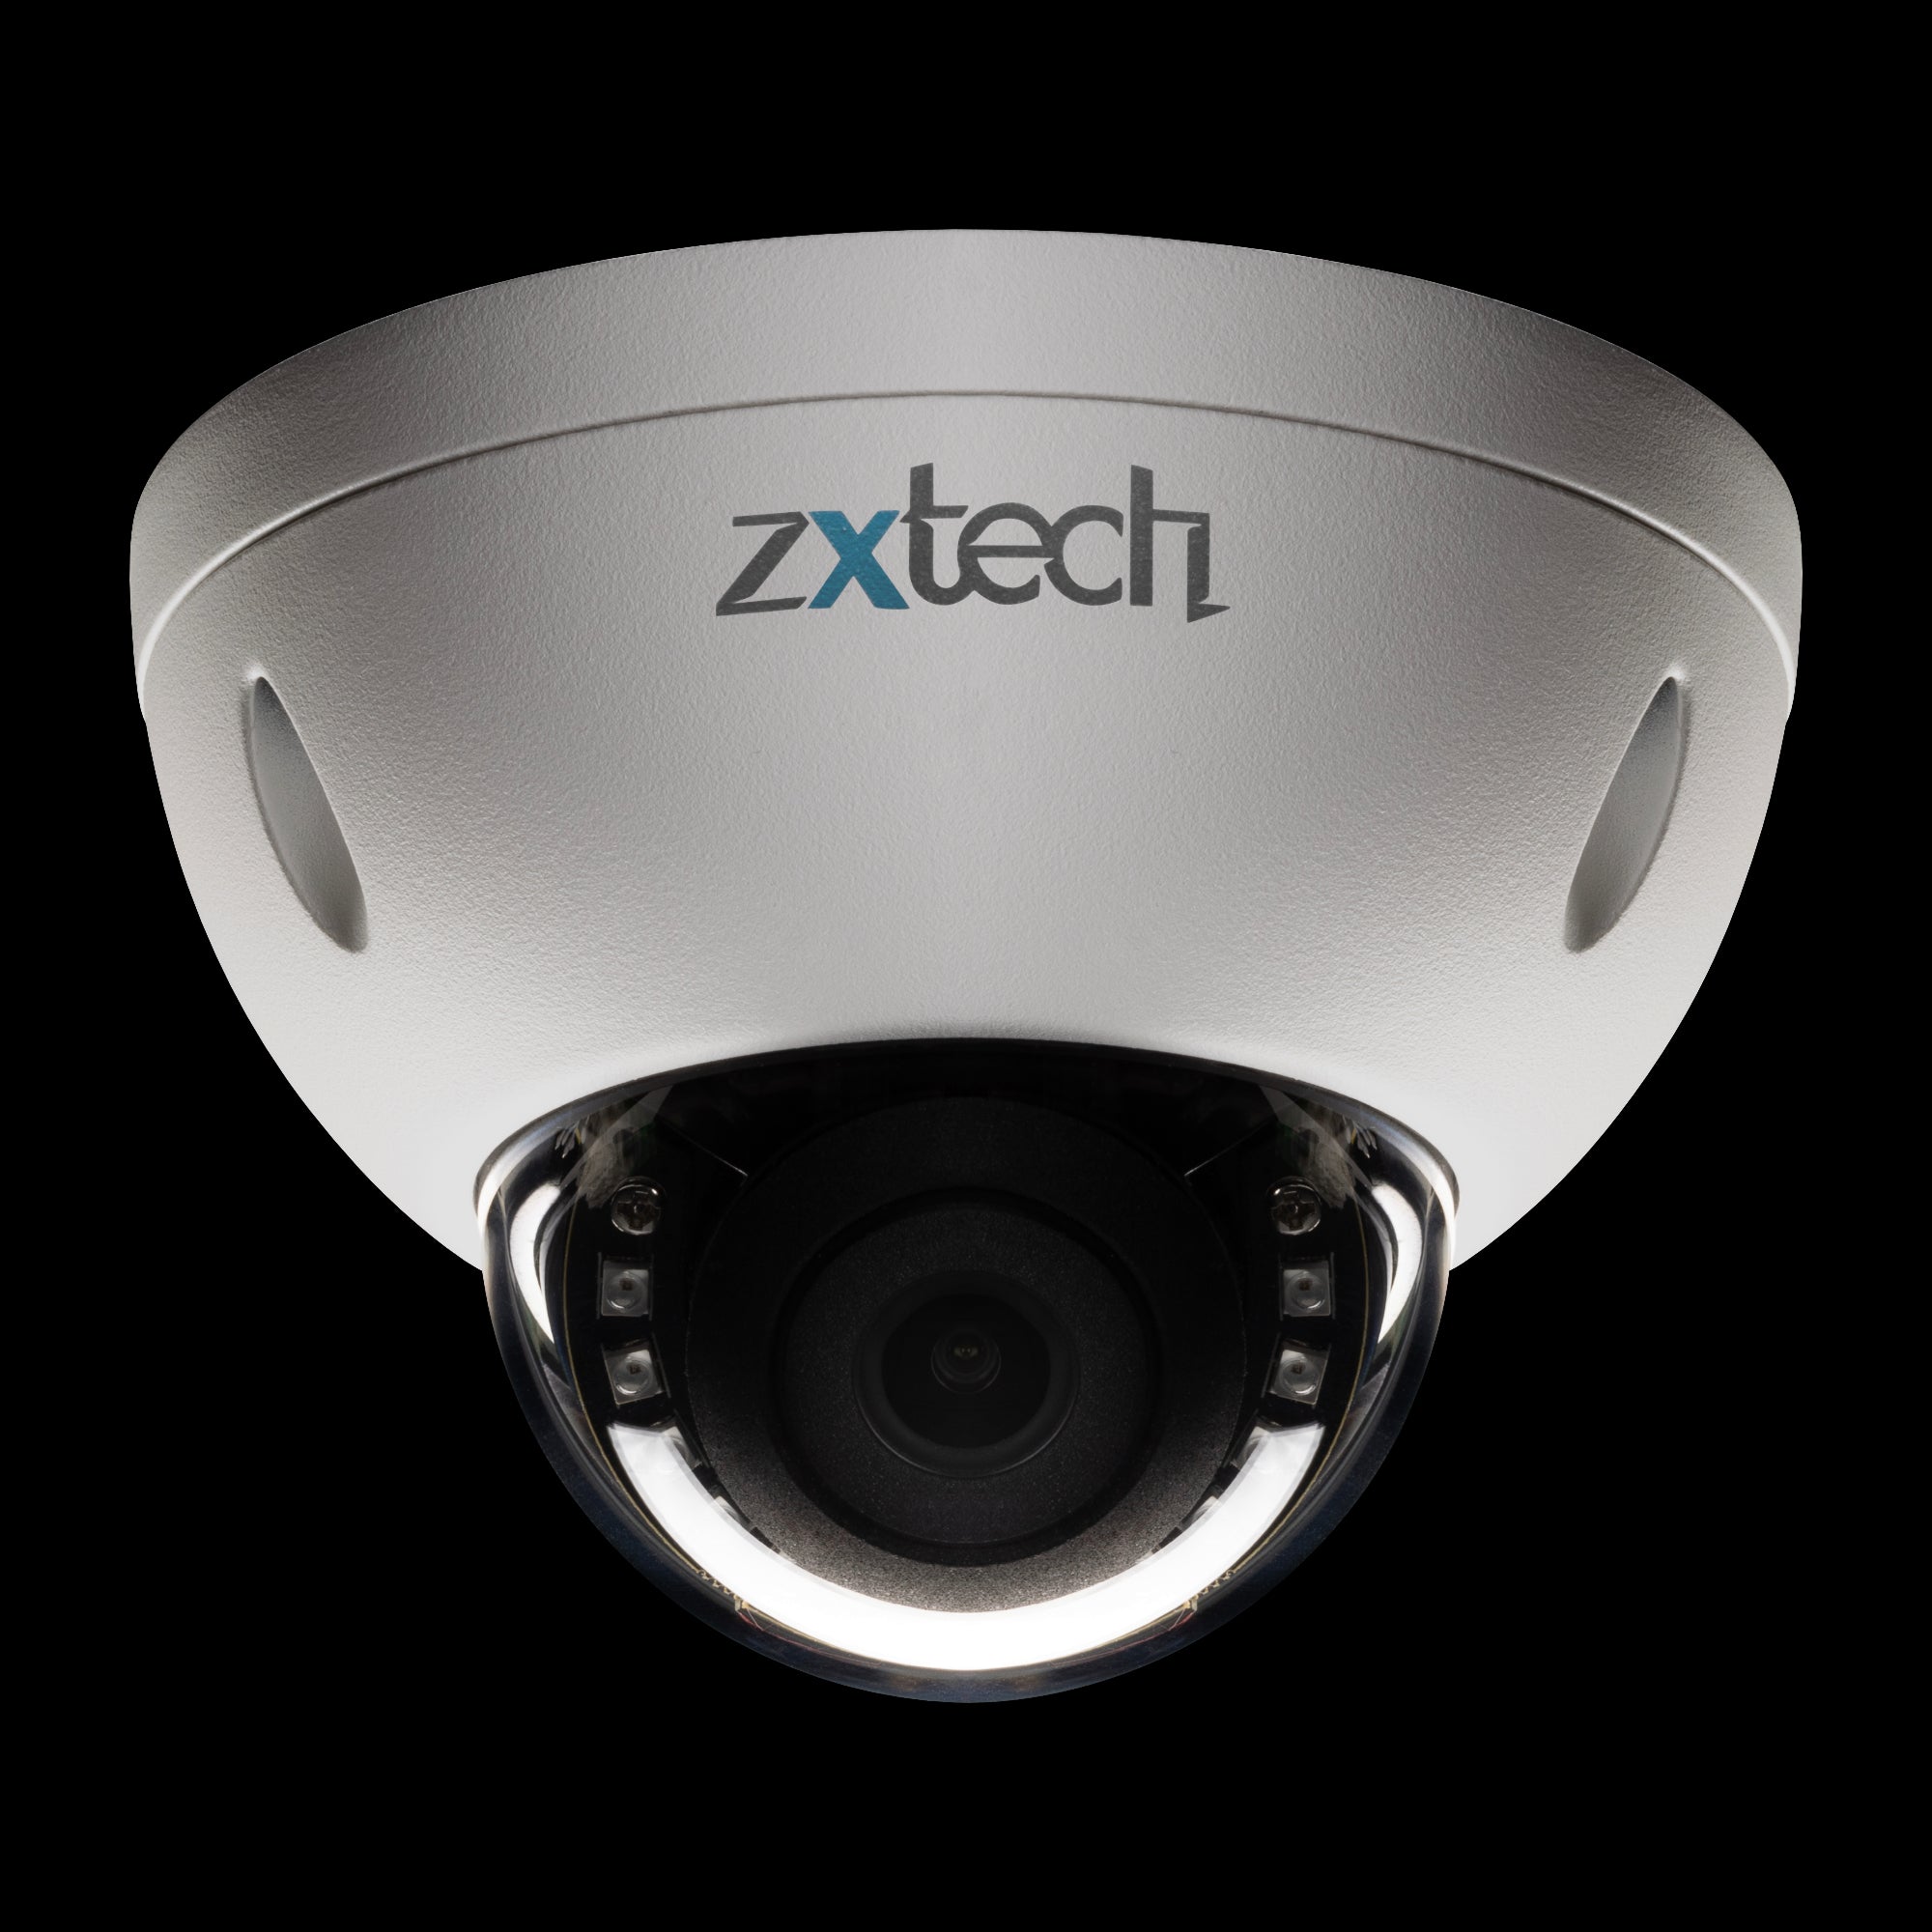 Zxtech IK10 4K CCTV System - 7 x IP PoE Cameras Face Detection Outdoor Sony Starvis Enhanced Night Vision  | IK7A9Y